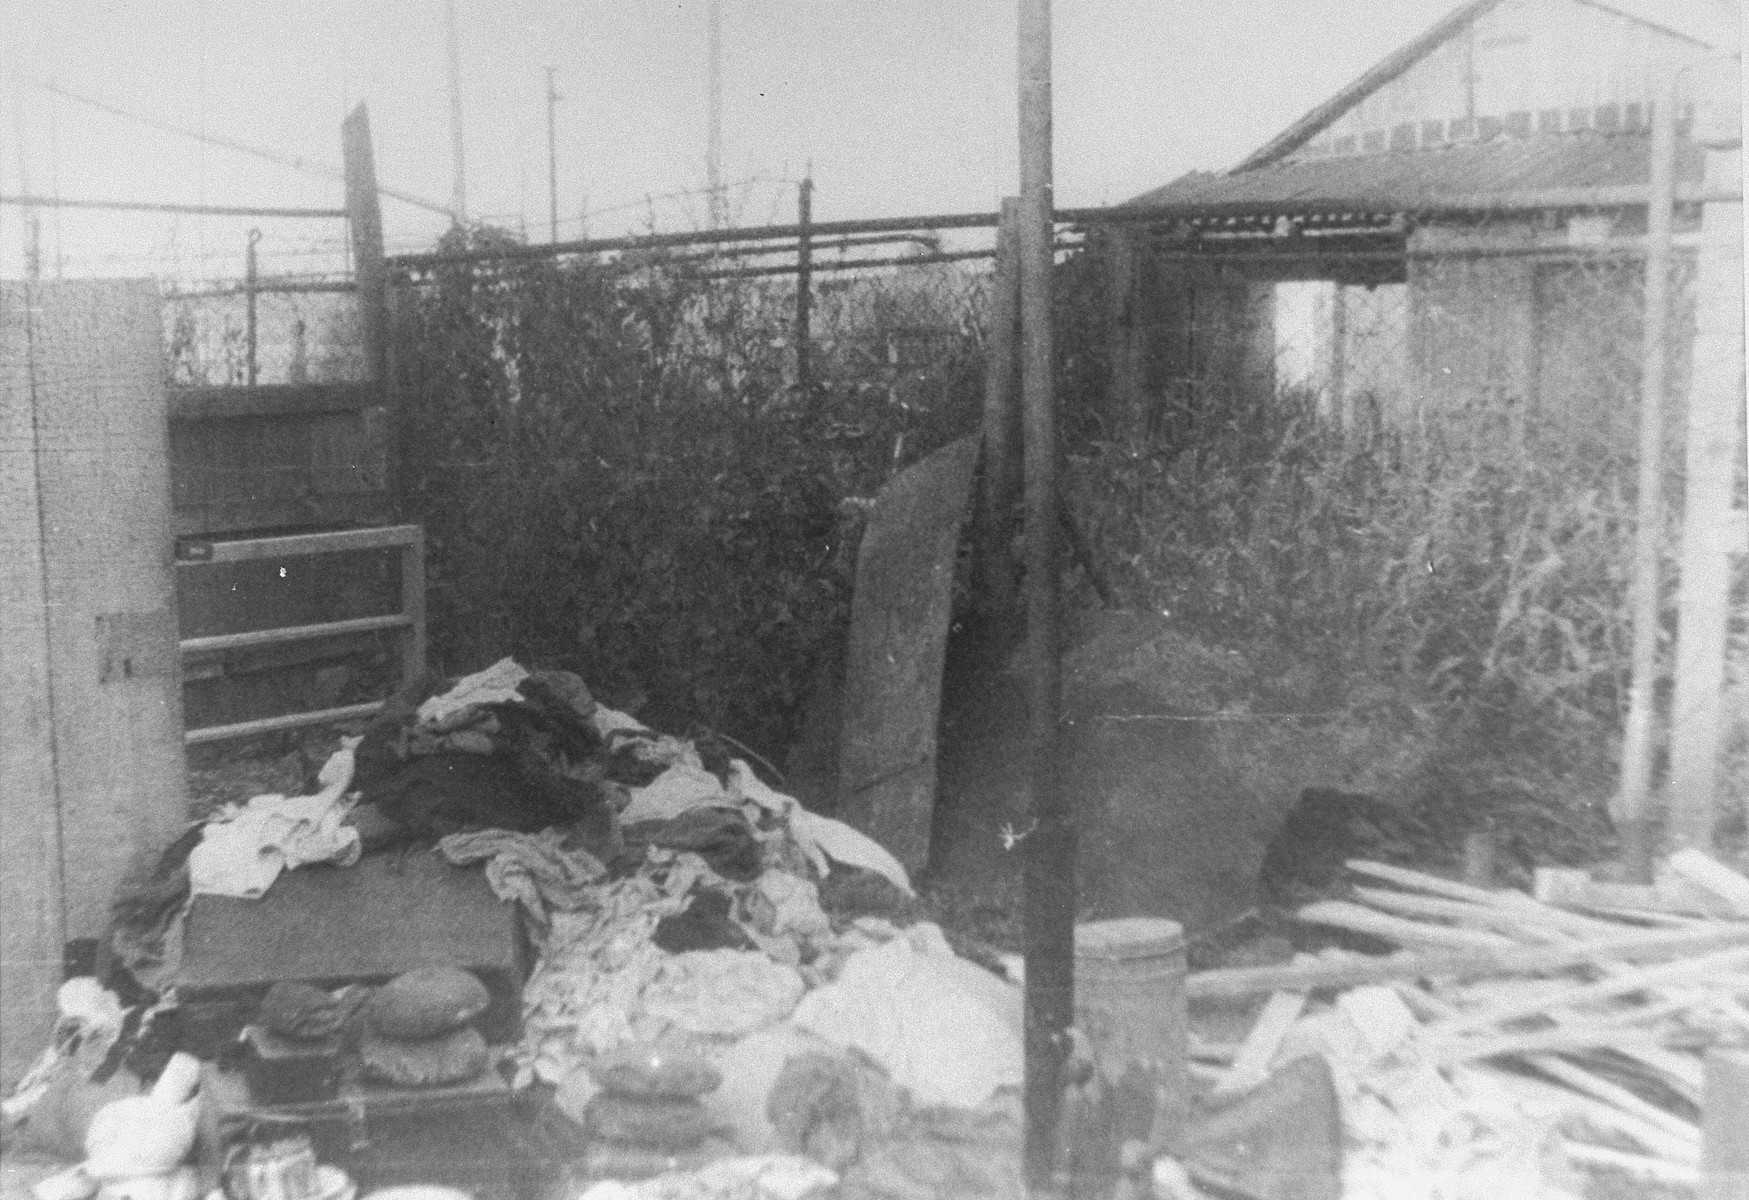 View of a former hiding place of Sabina Haberman, after its discovery. 

Seen are the belongings of its inhabitants.